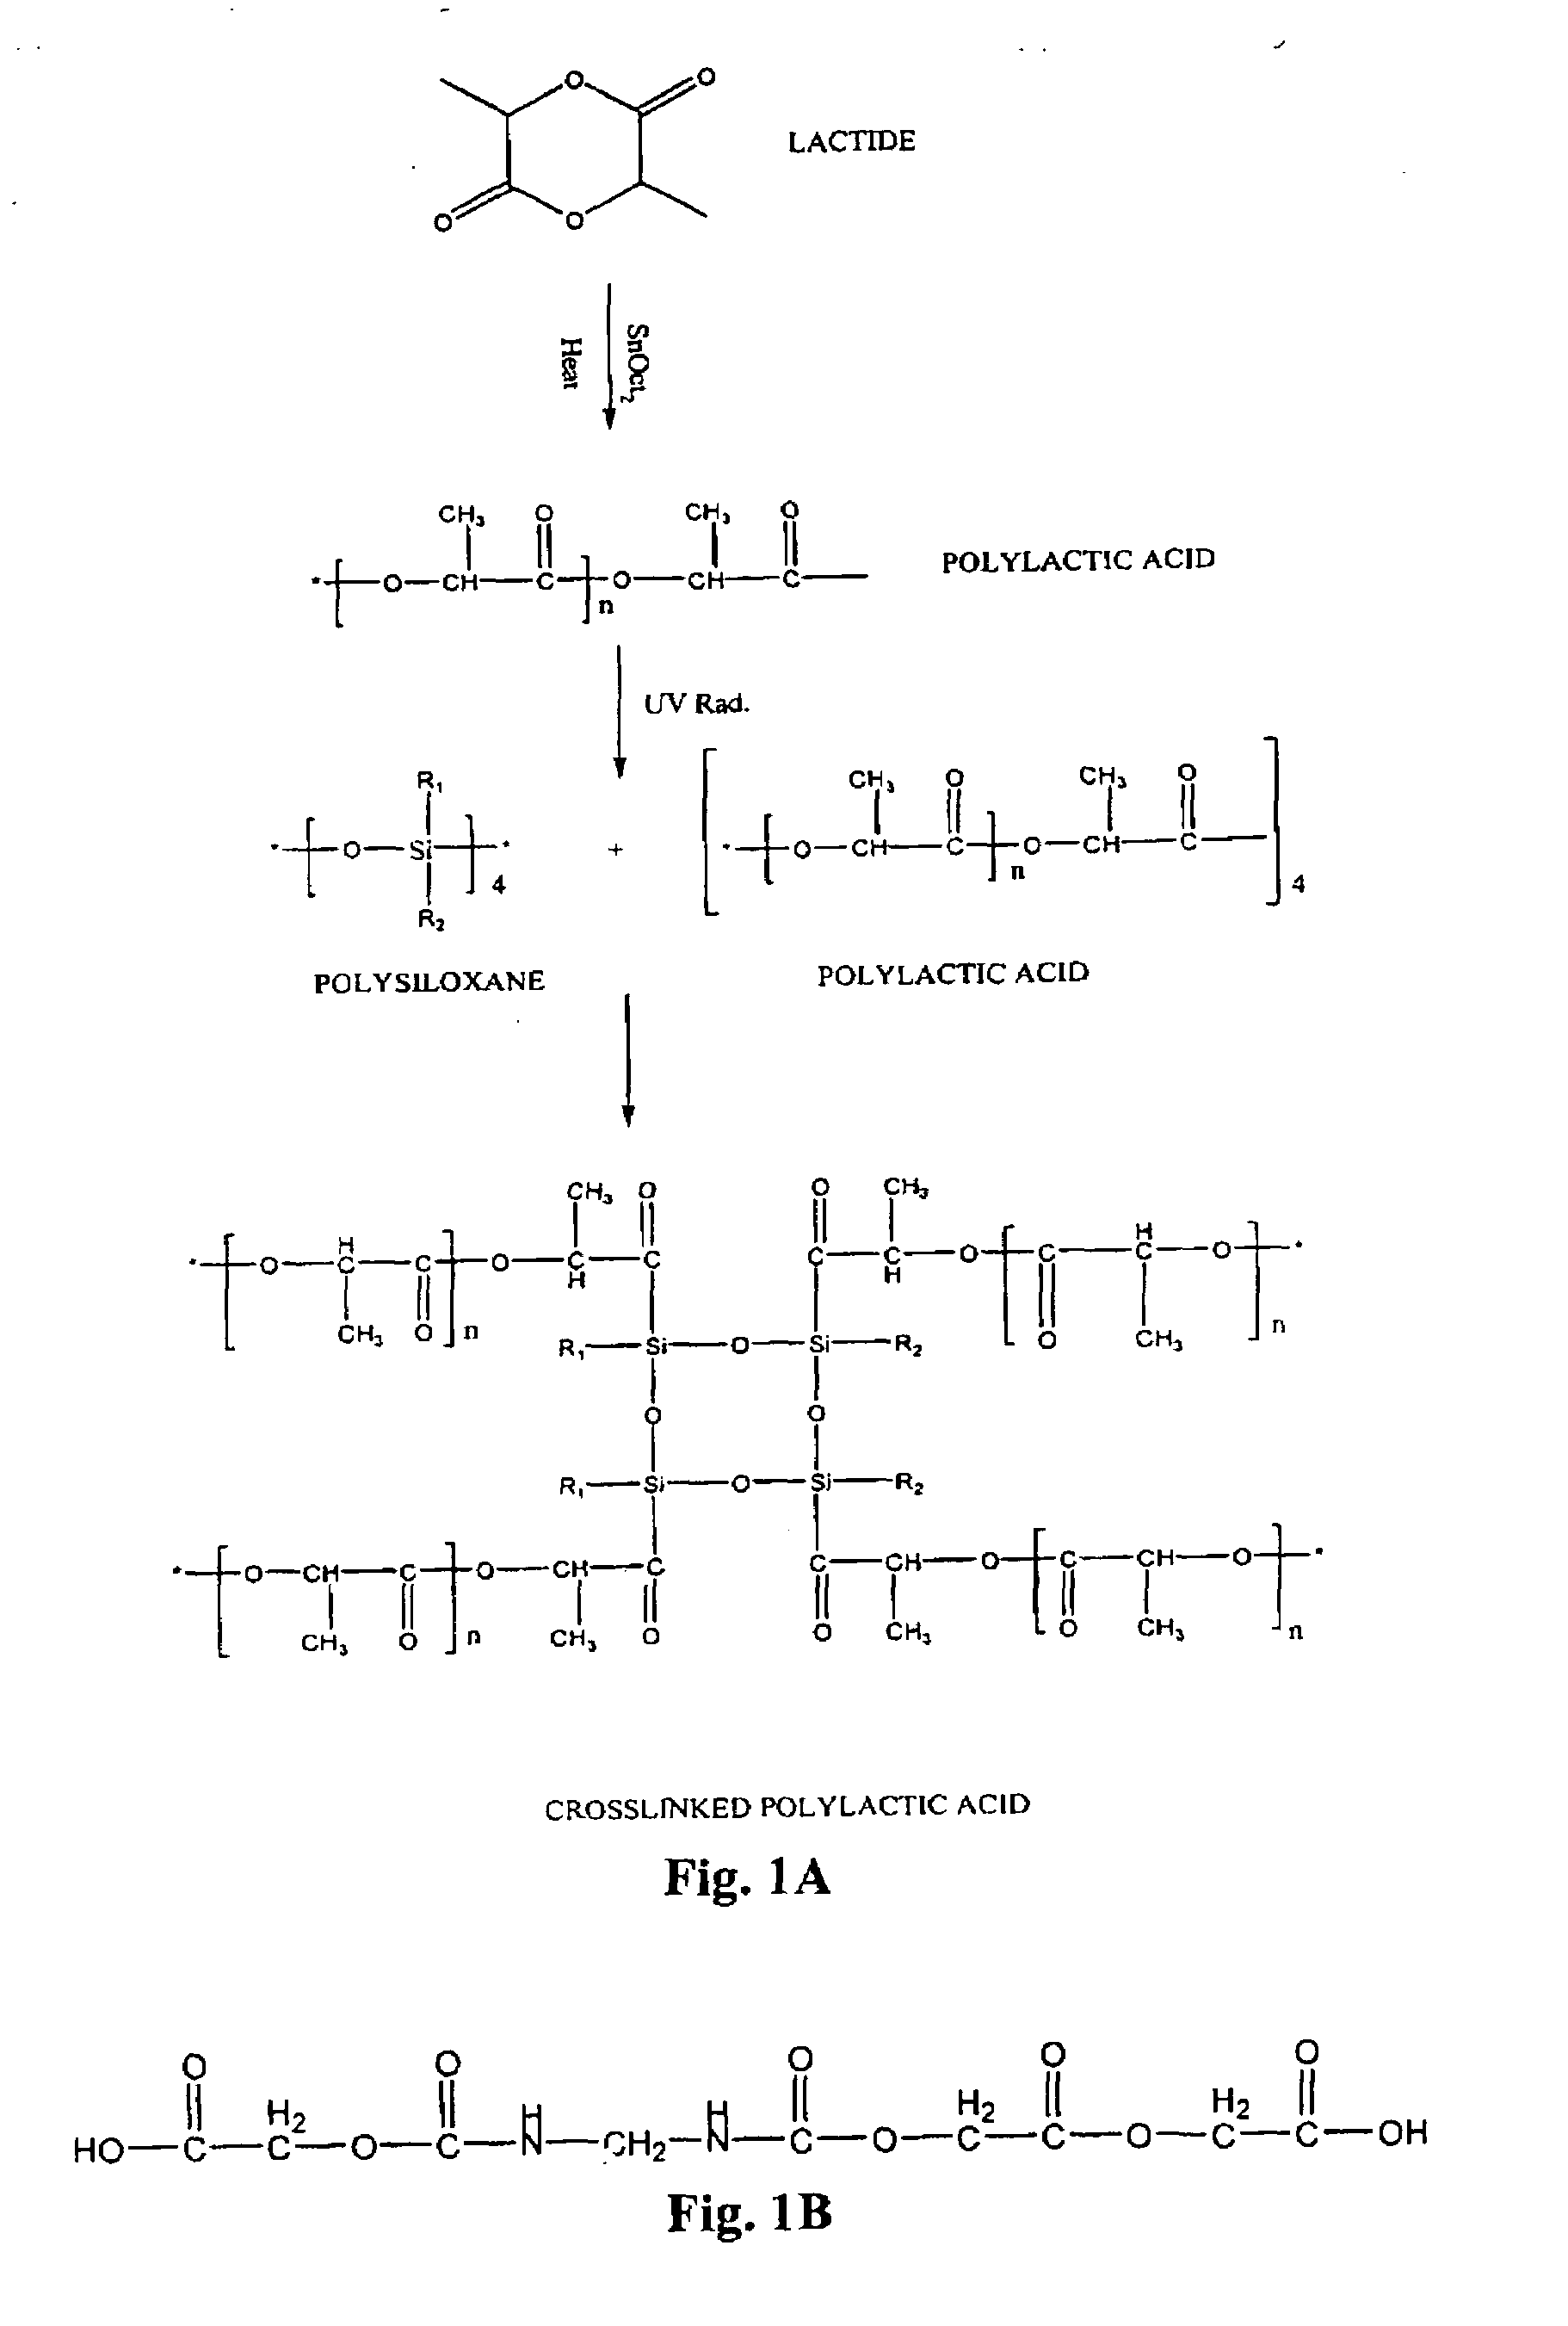 Methods of treating spinal injuries using injectable flowable compositions comprising organic materials